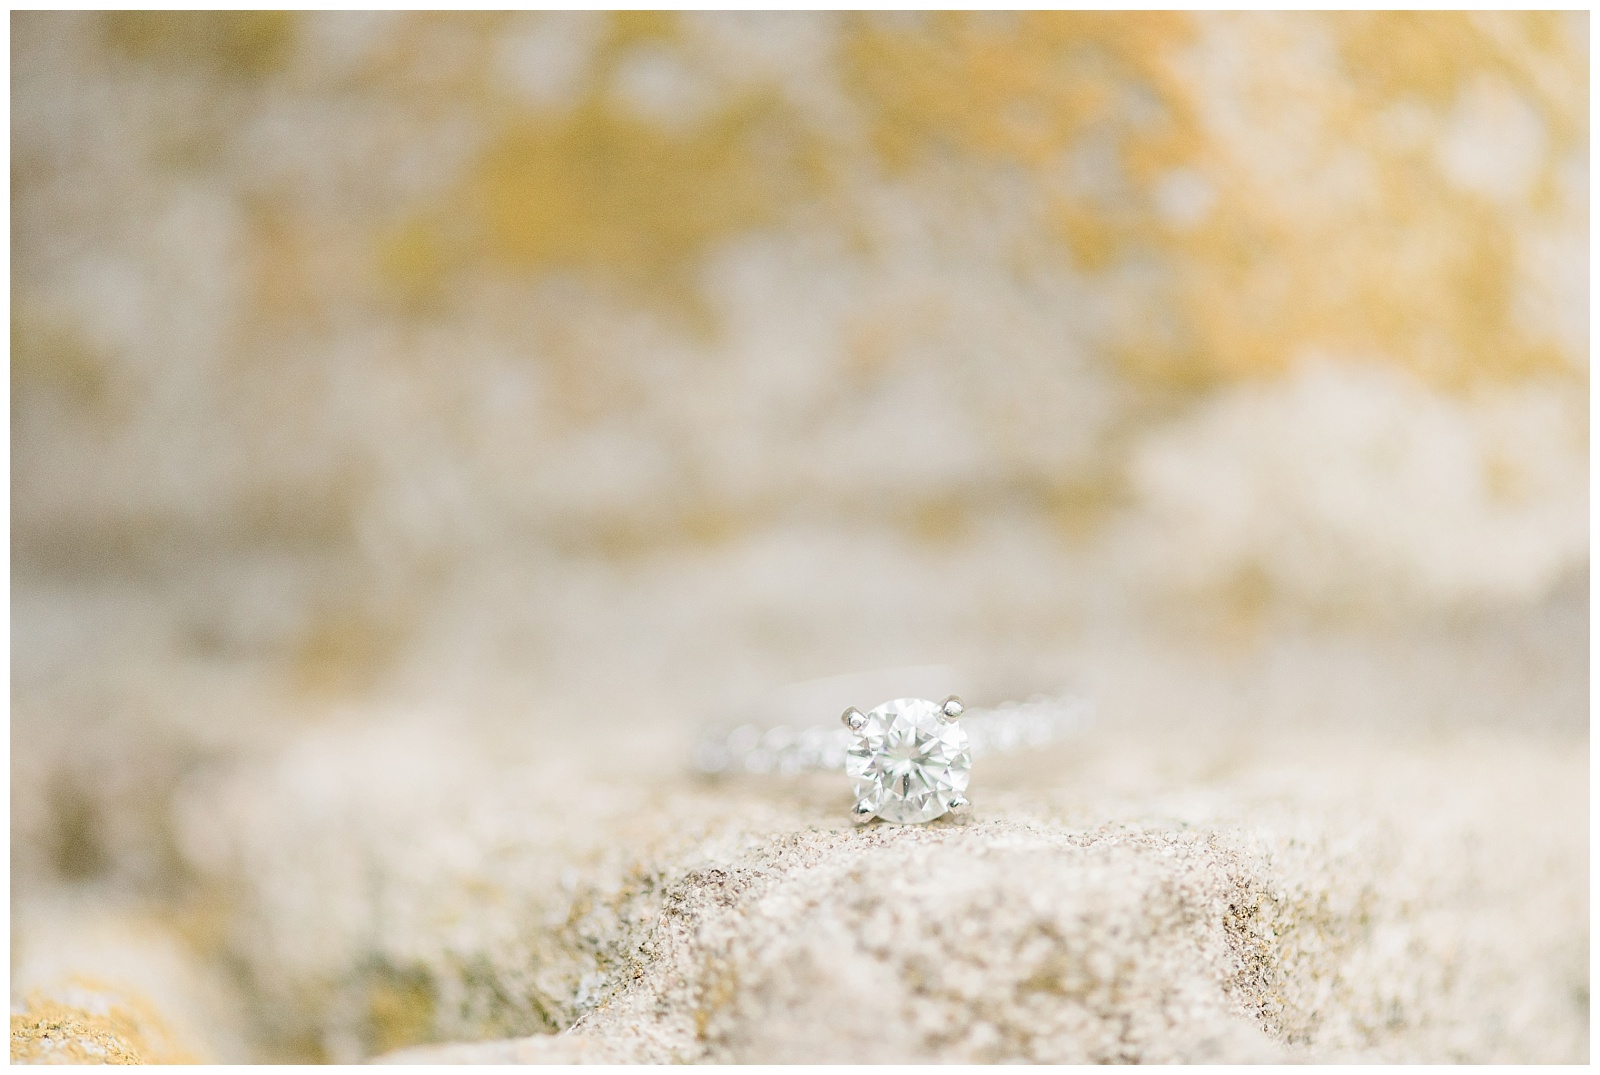 A diamond engagement ring sits on a concrete fountain wall.